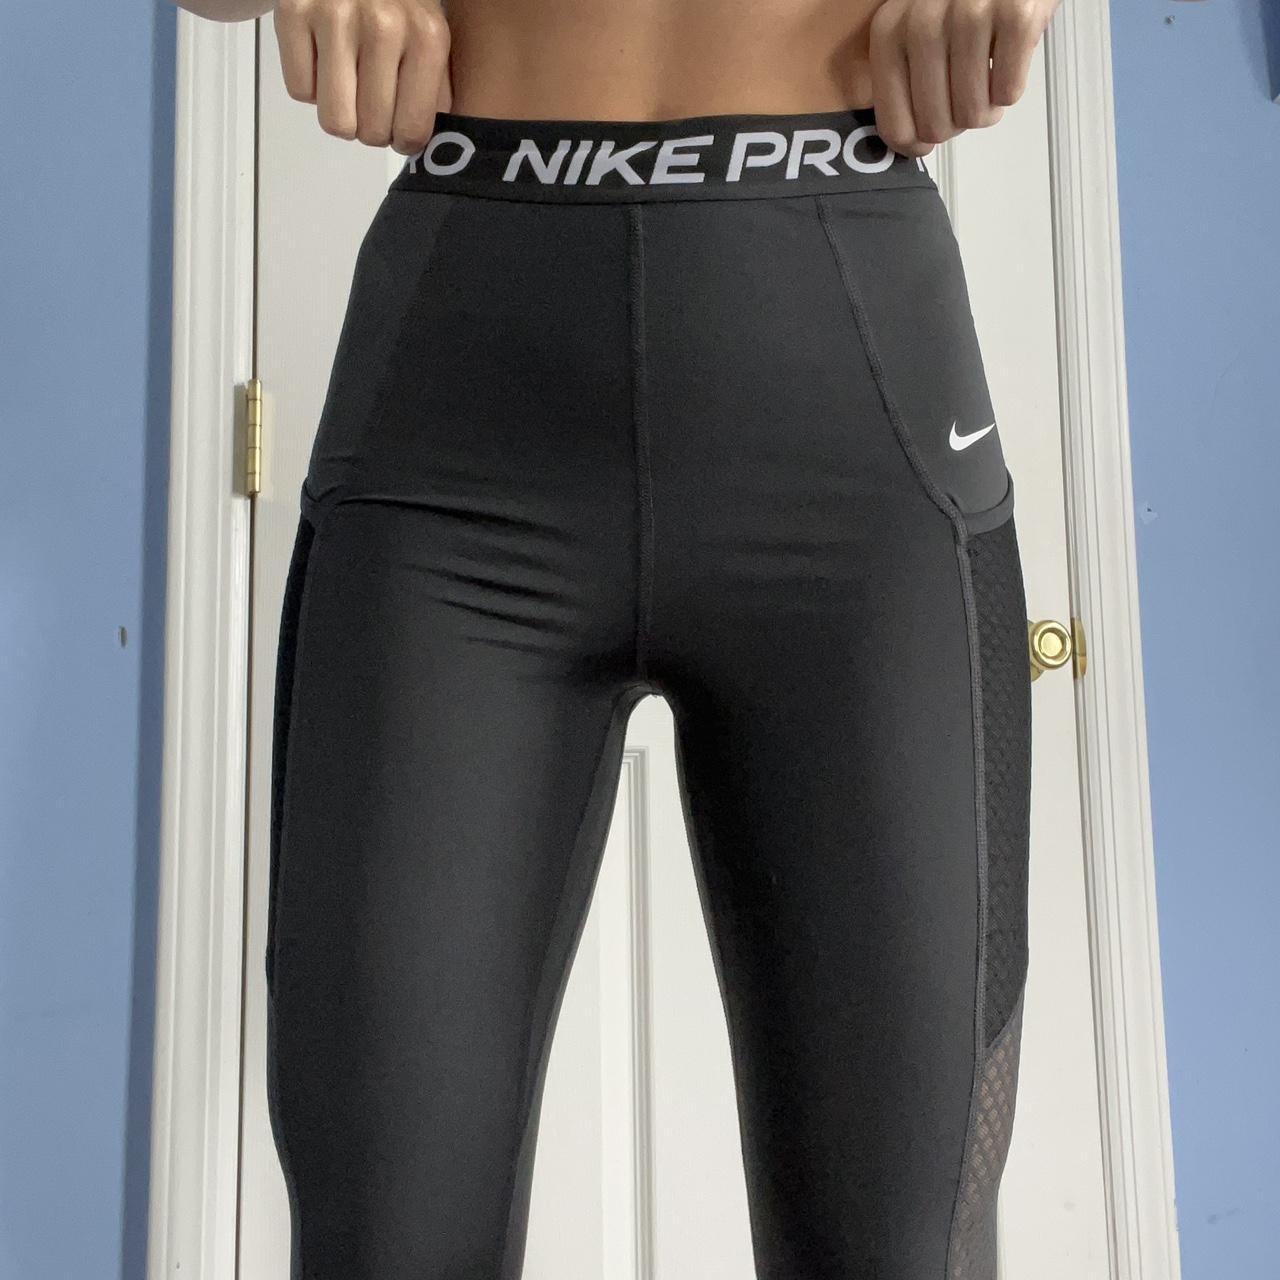 Nike Pro running leggings /, size: S (tag cut out) /